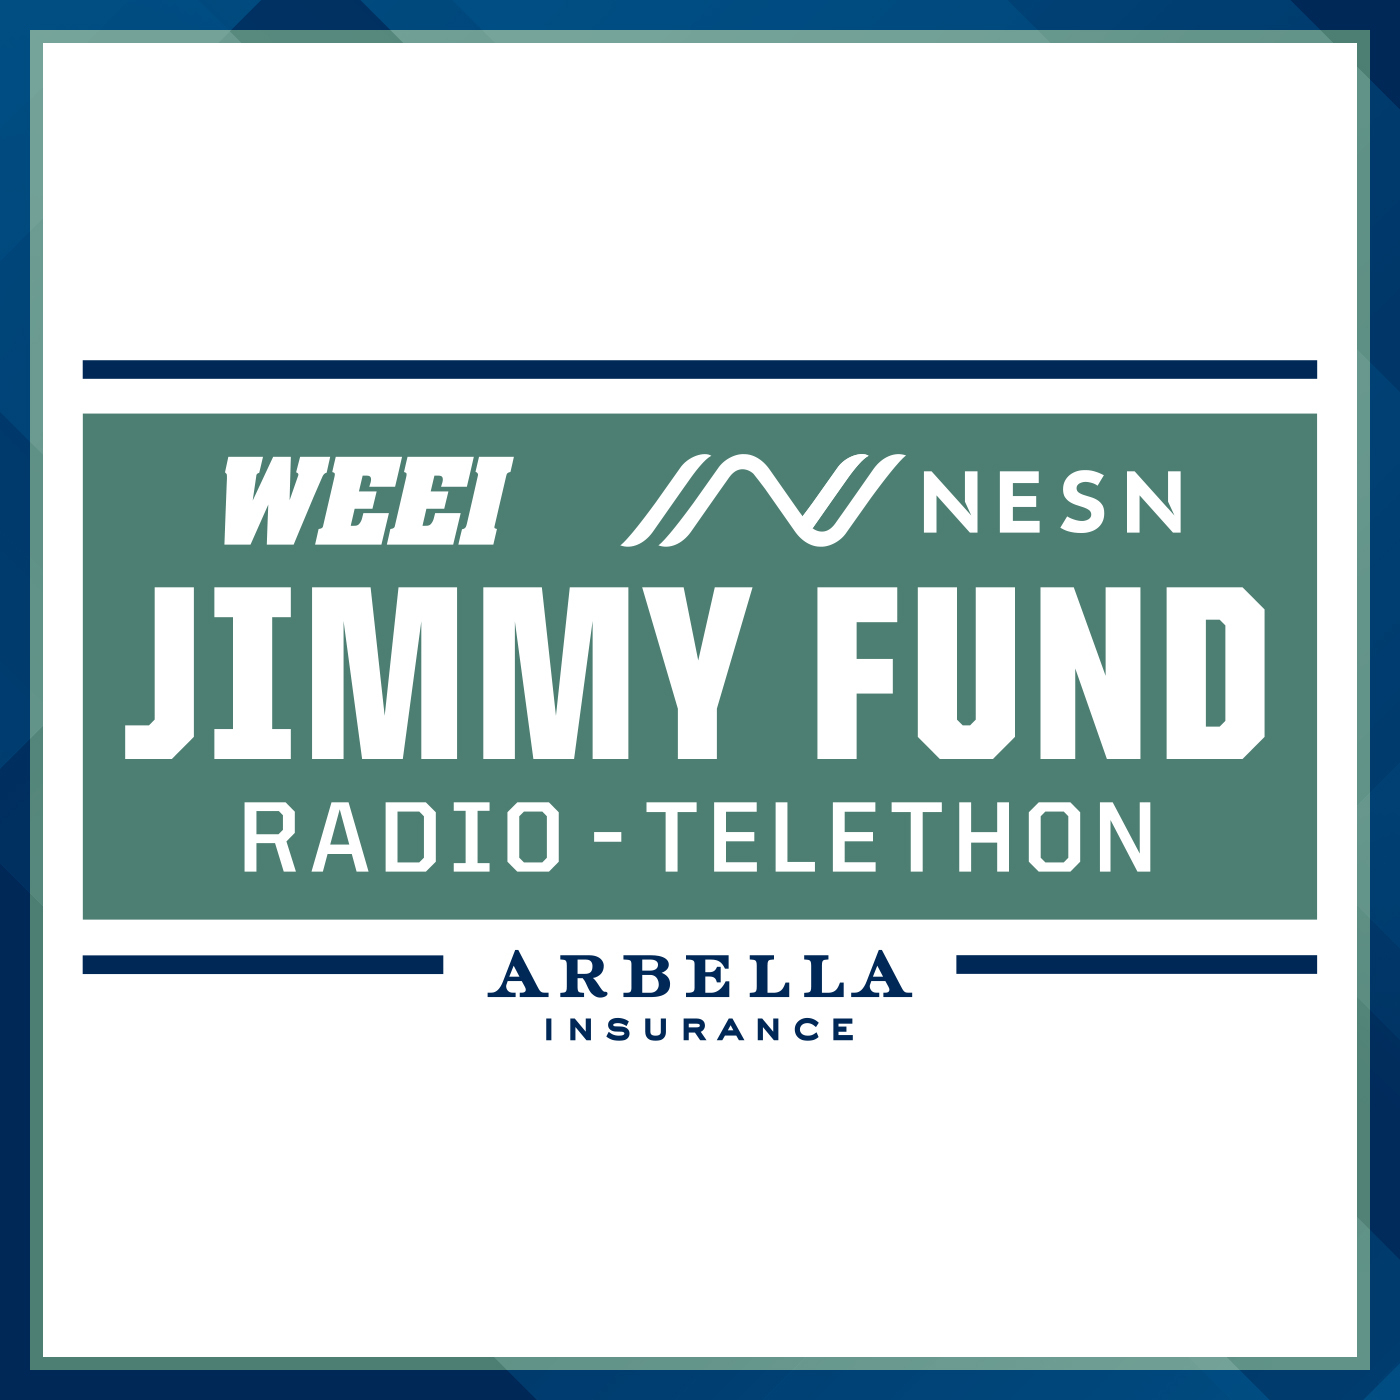 Sam Kennedy joins Gresh and Keefe to discuss the Jimmy Fund as well as the Red Sox plans for Bogaerts and Devers